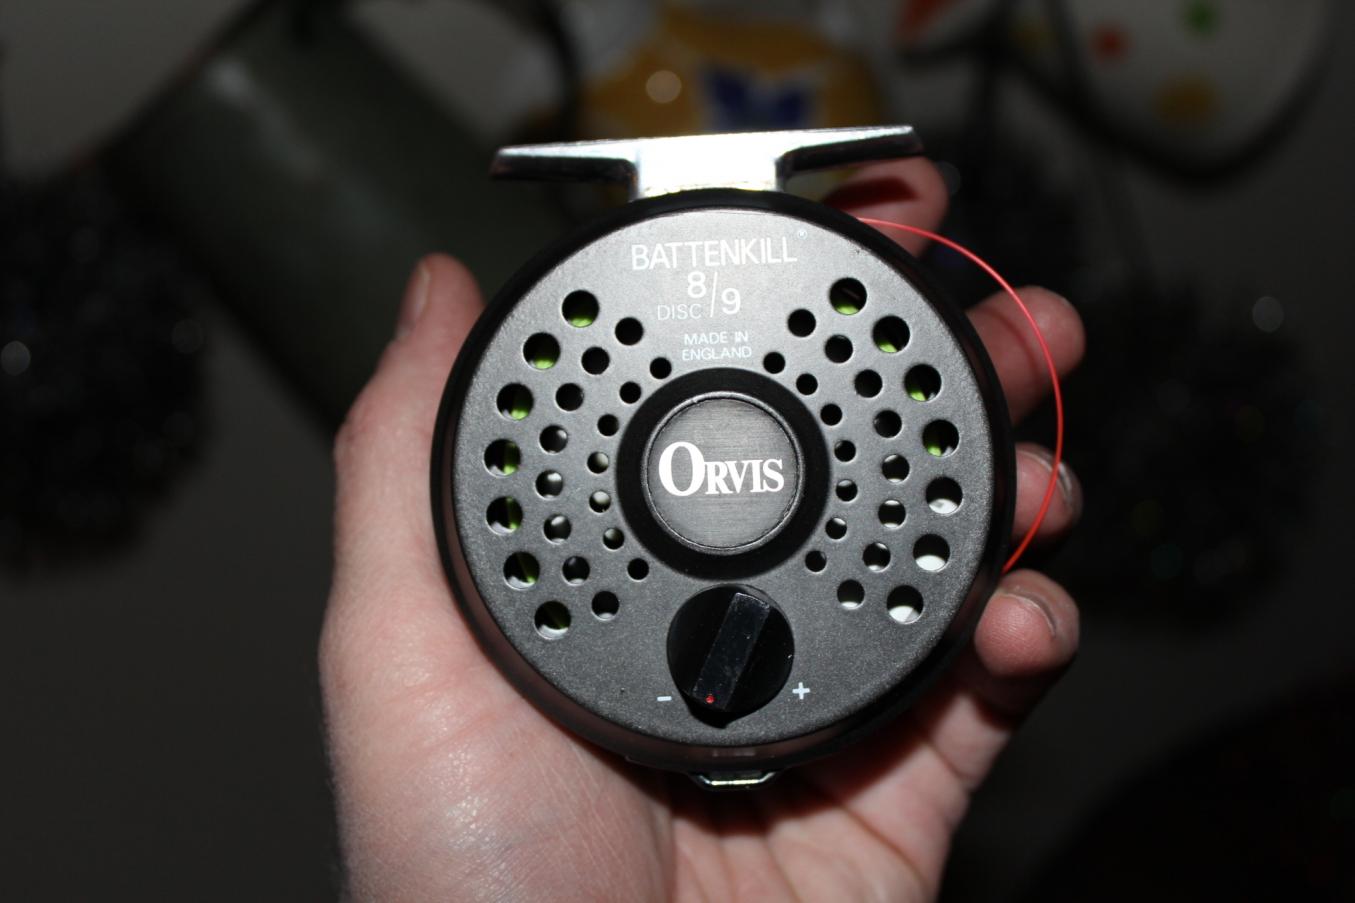 2 Orvis Battenkill made in England reels for sale or trade